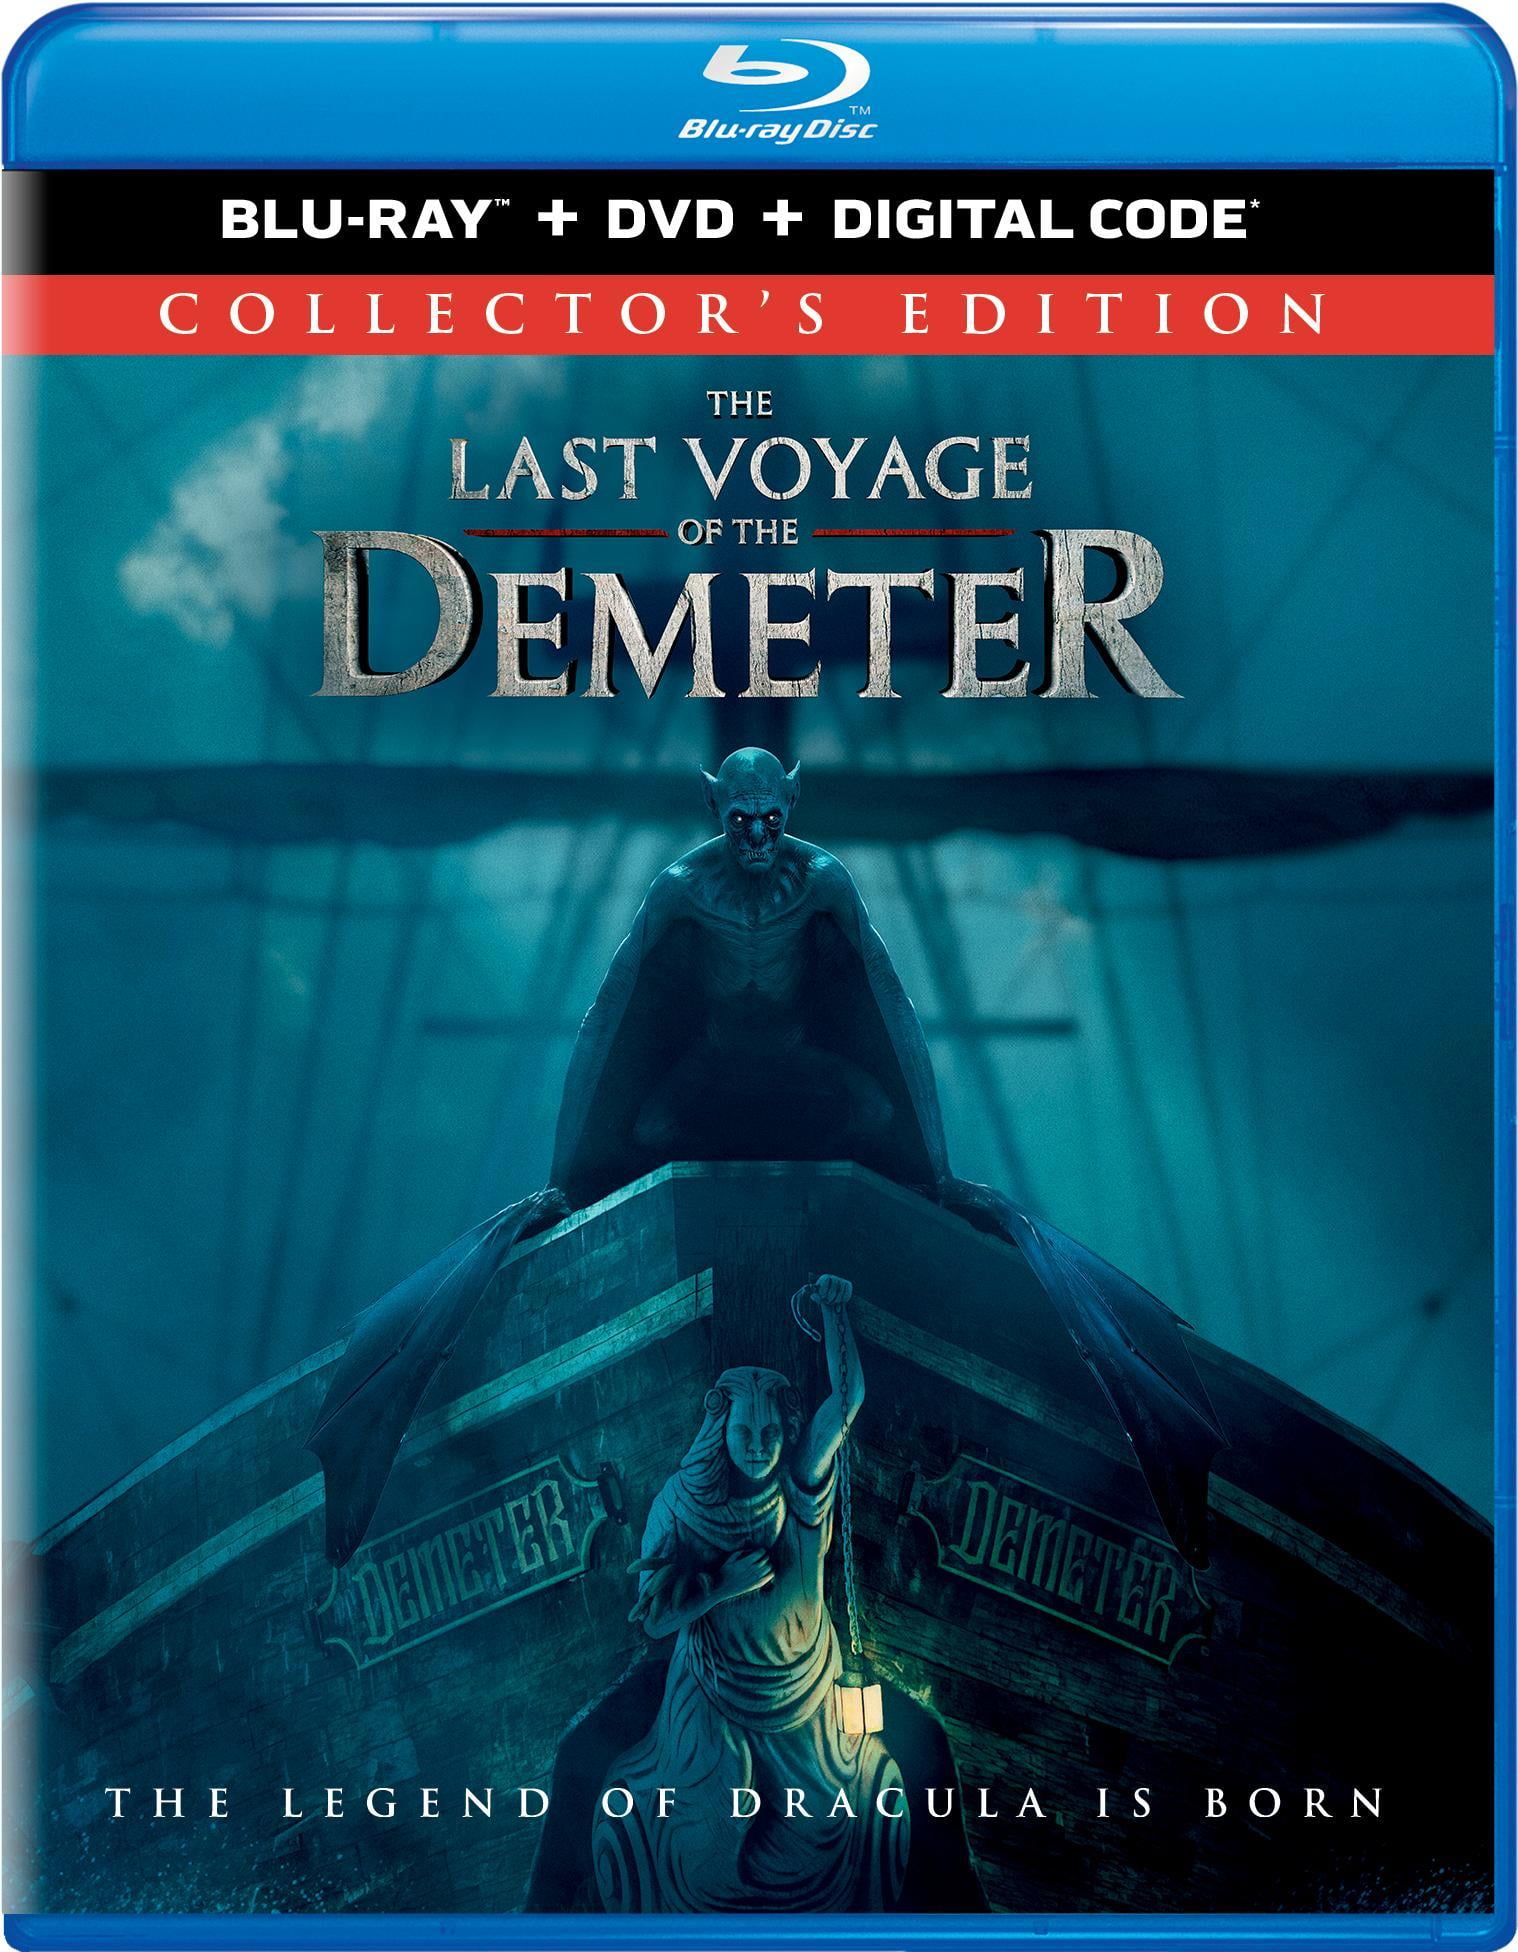 The Last Voyage of the Demeter at an AMC Theatre near you.